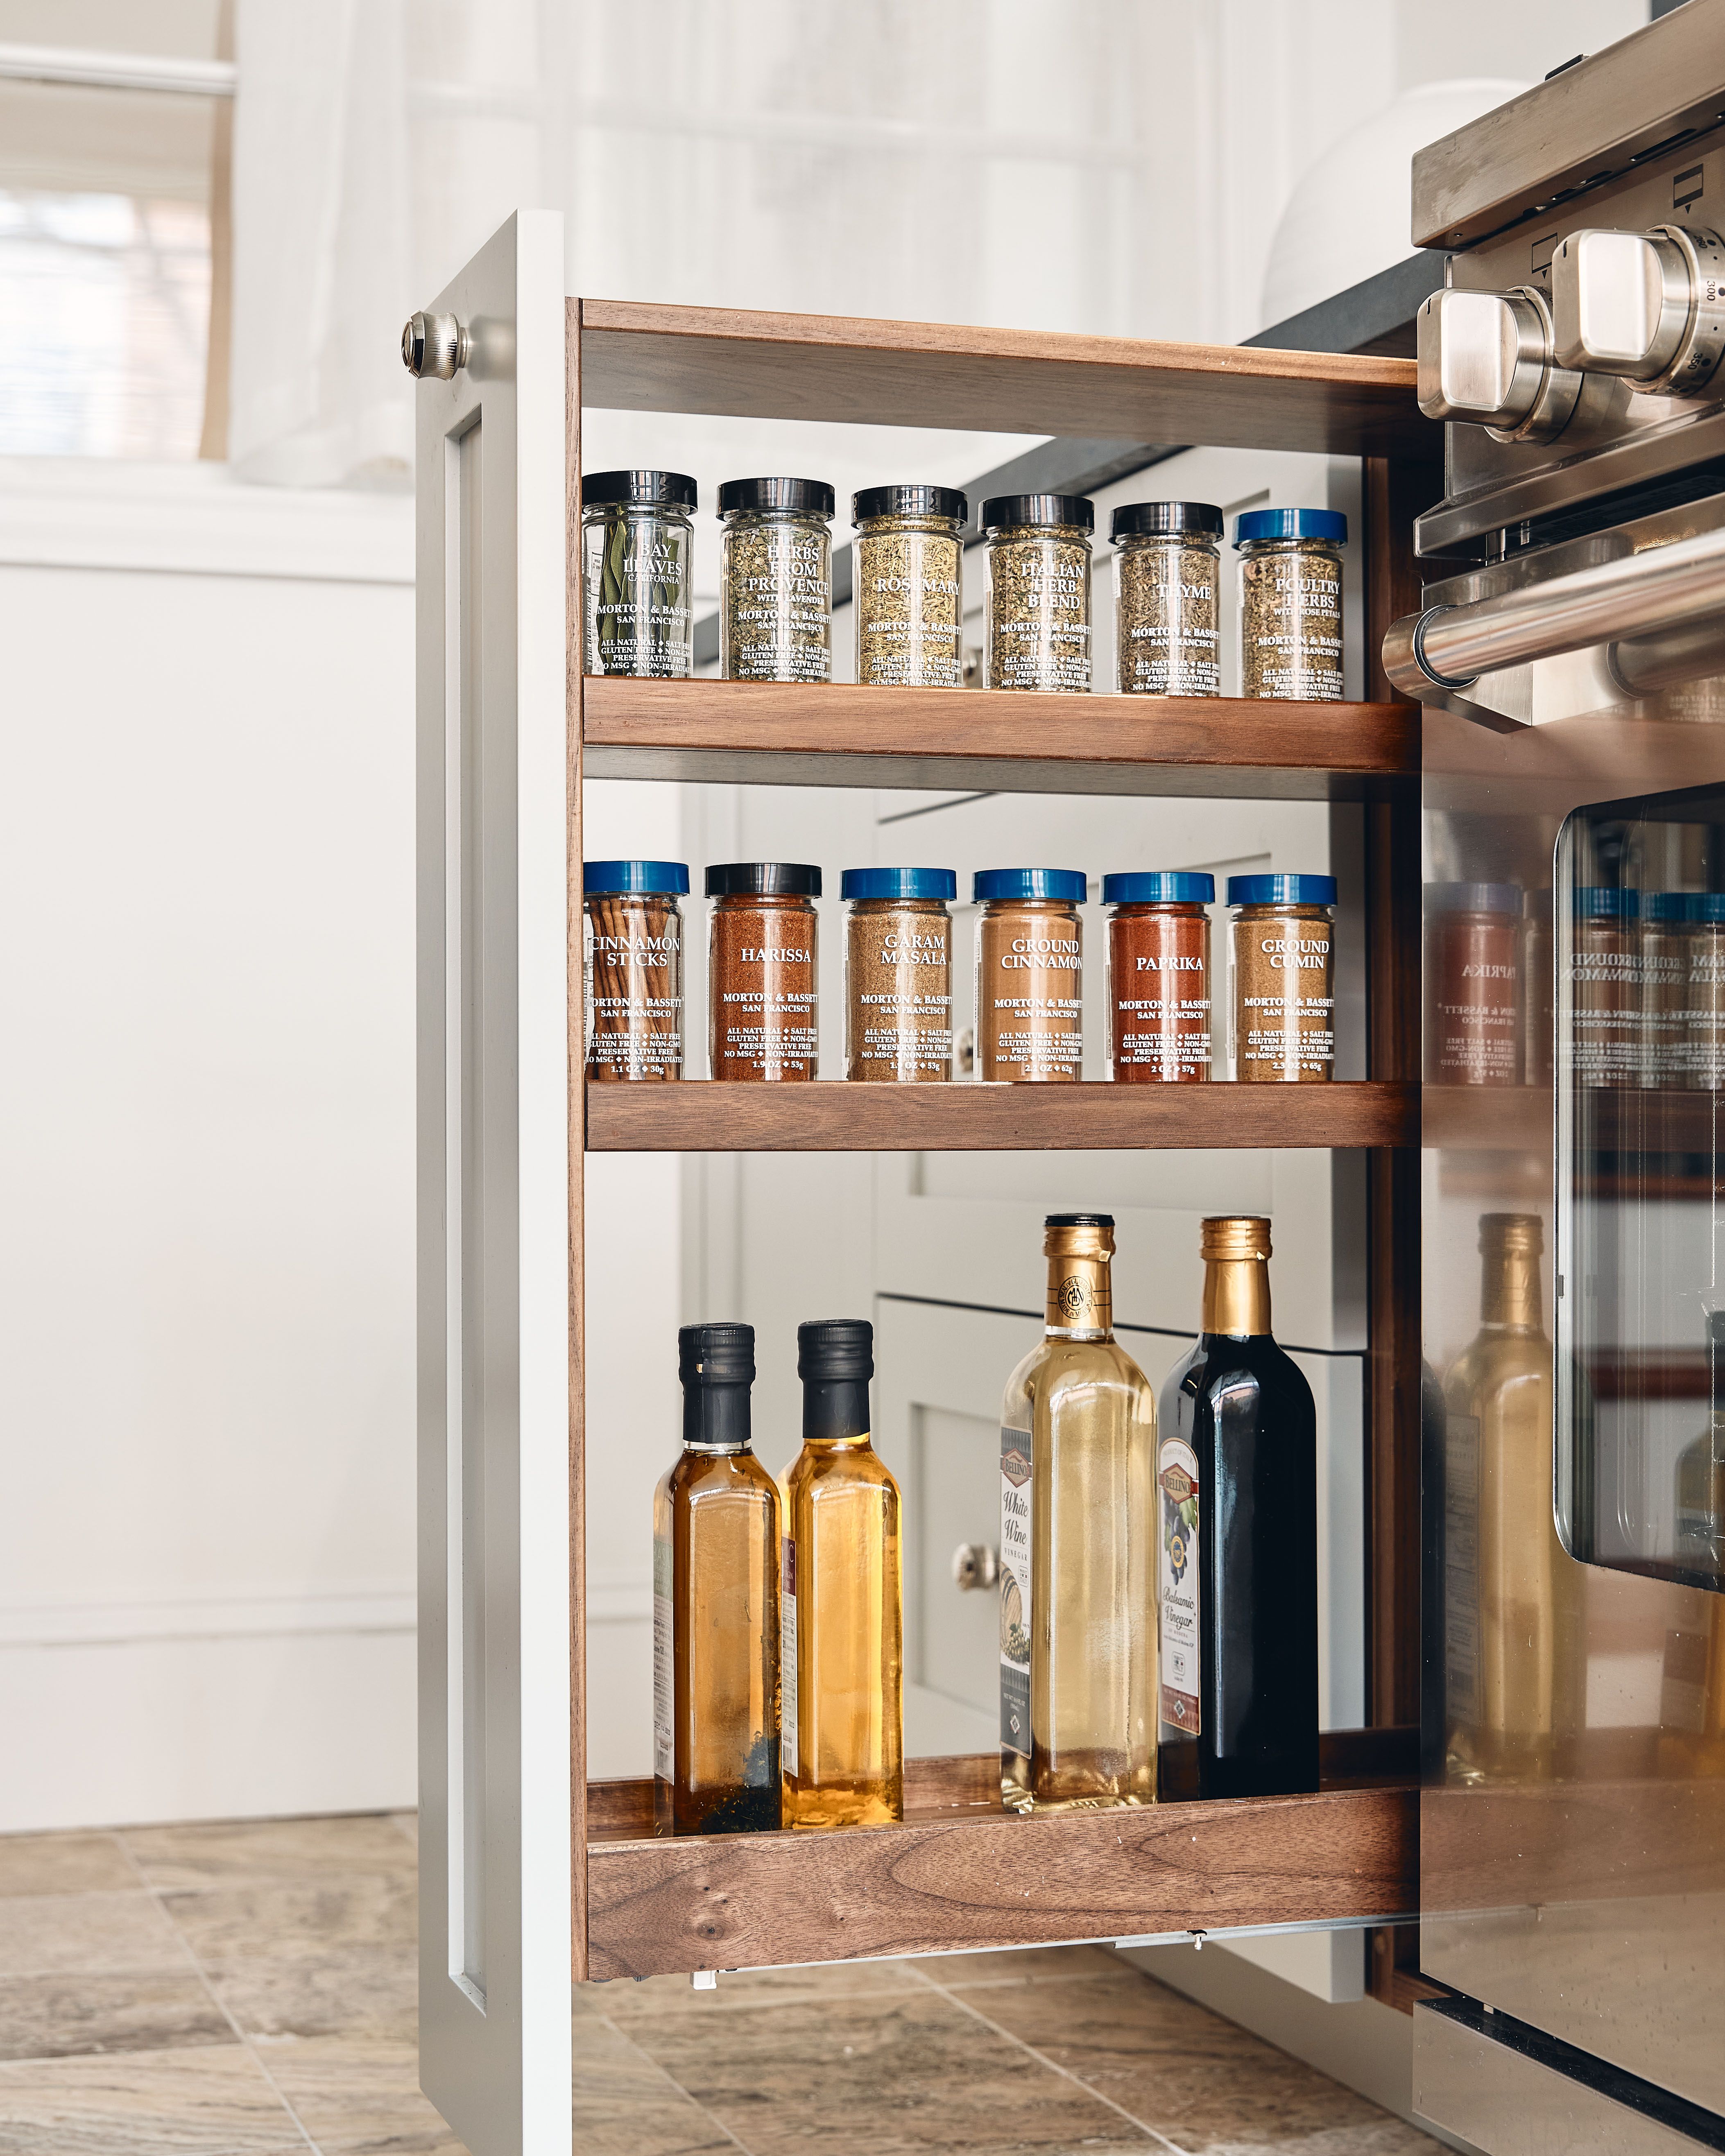 10 Innovative Spice Rack Ideas and Storage Solutions